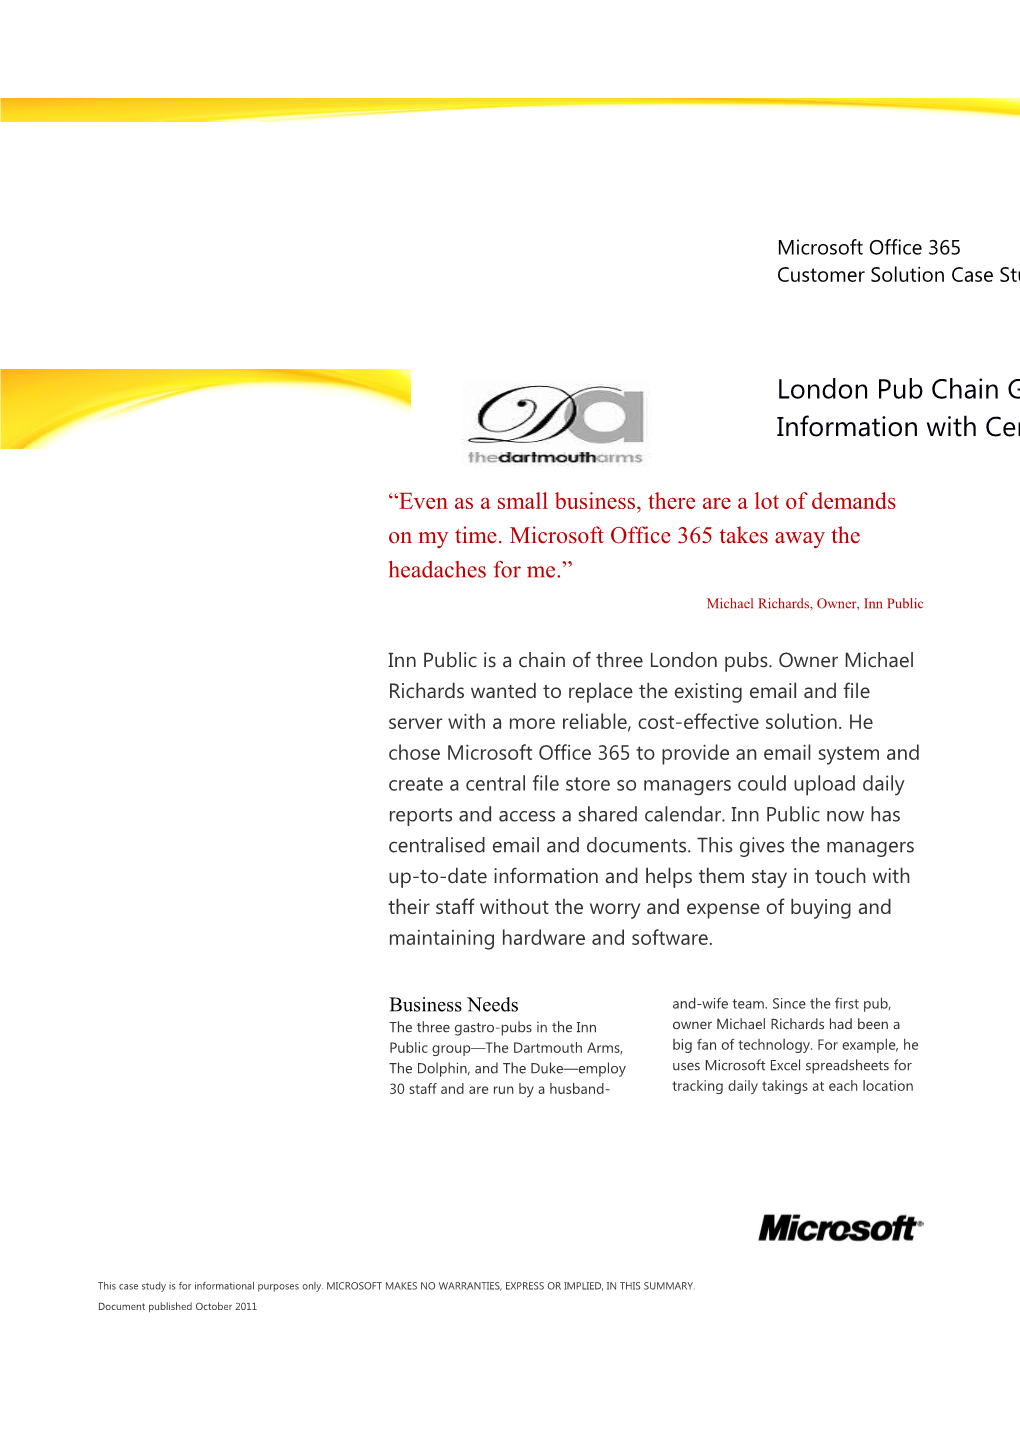 Writeimage CSB London Pub Chain Relies on Microsoft for Email